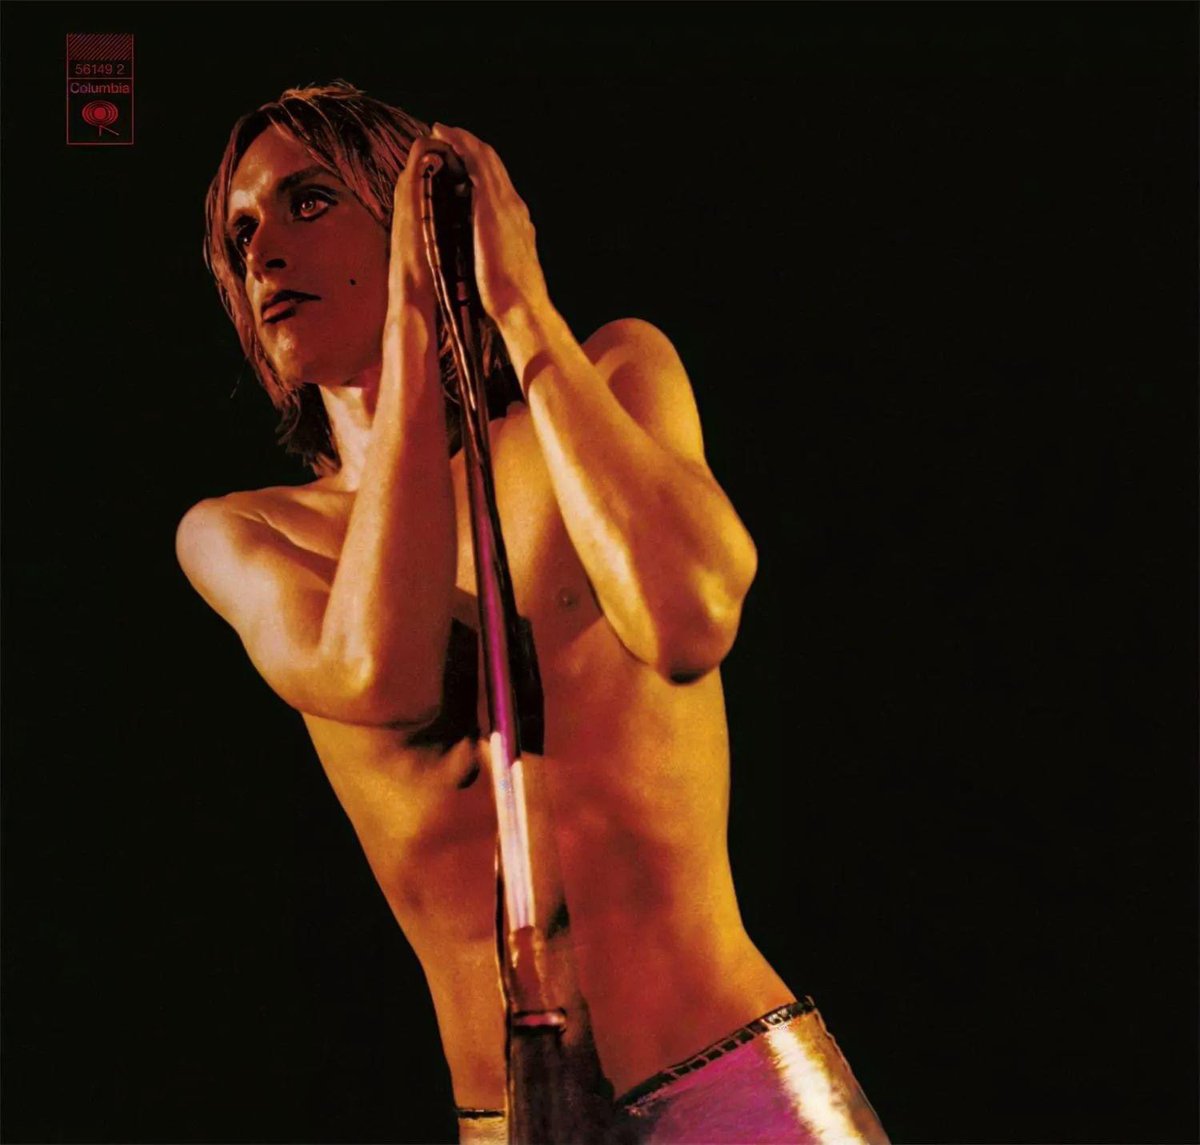 On this day in 1973, The Stooges released their third studio album “Raw Power” featuring singles 'Search and Destroy' 'Shake Appeal' and 'Raw Power'